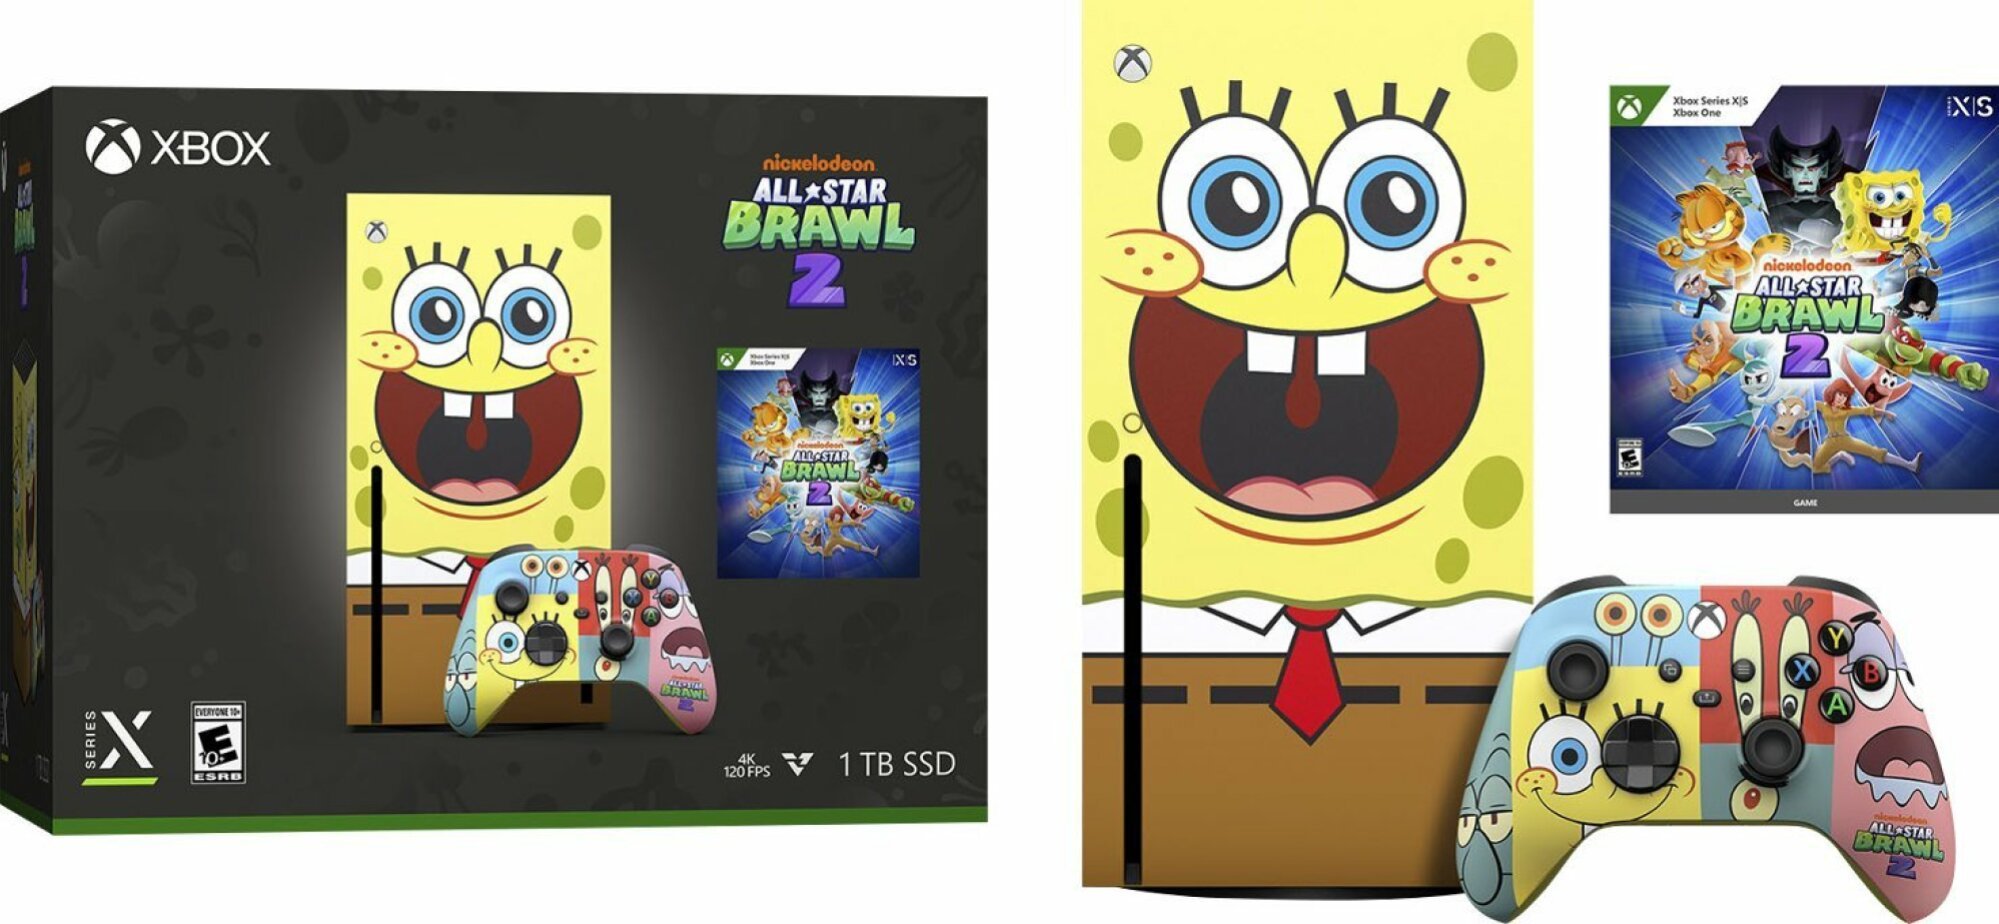 the Xbox Series X 'Nickelodeon All-Star Brawl 2' Special Edition Bundle